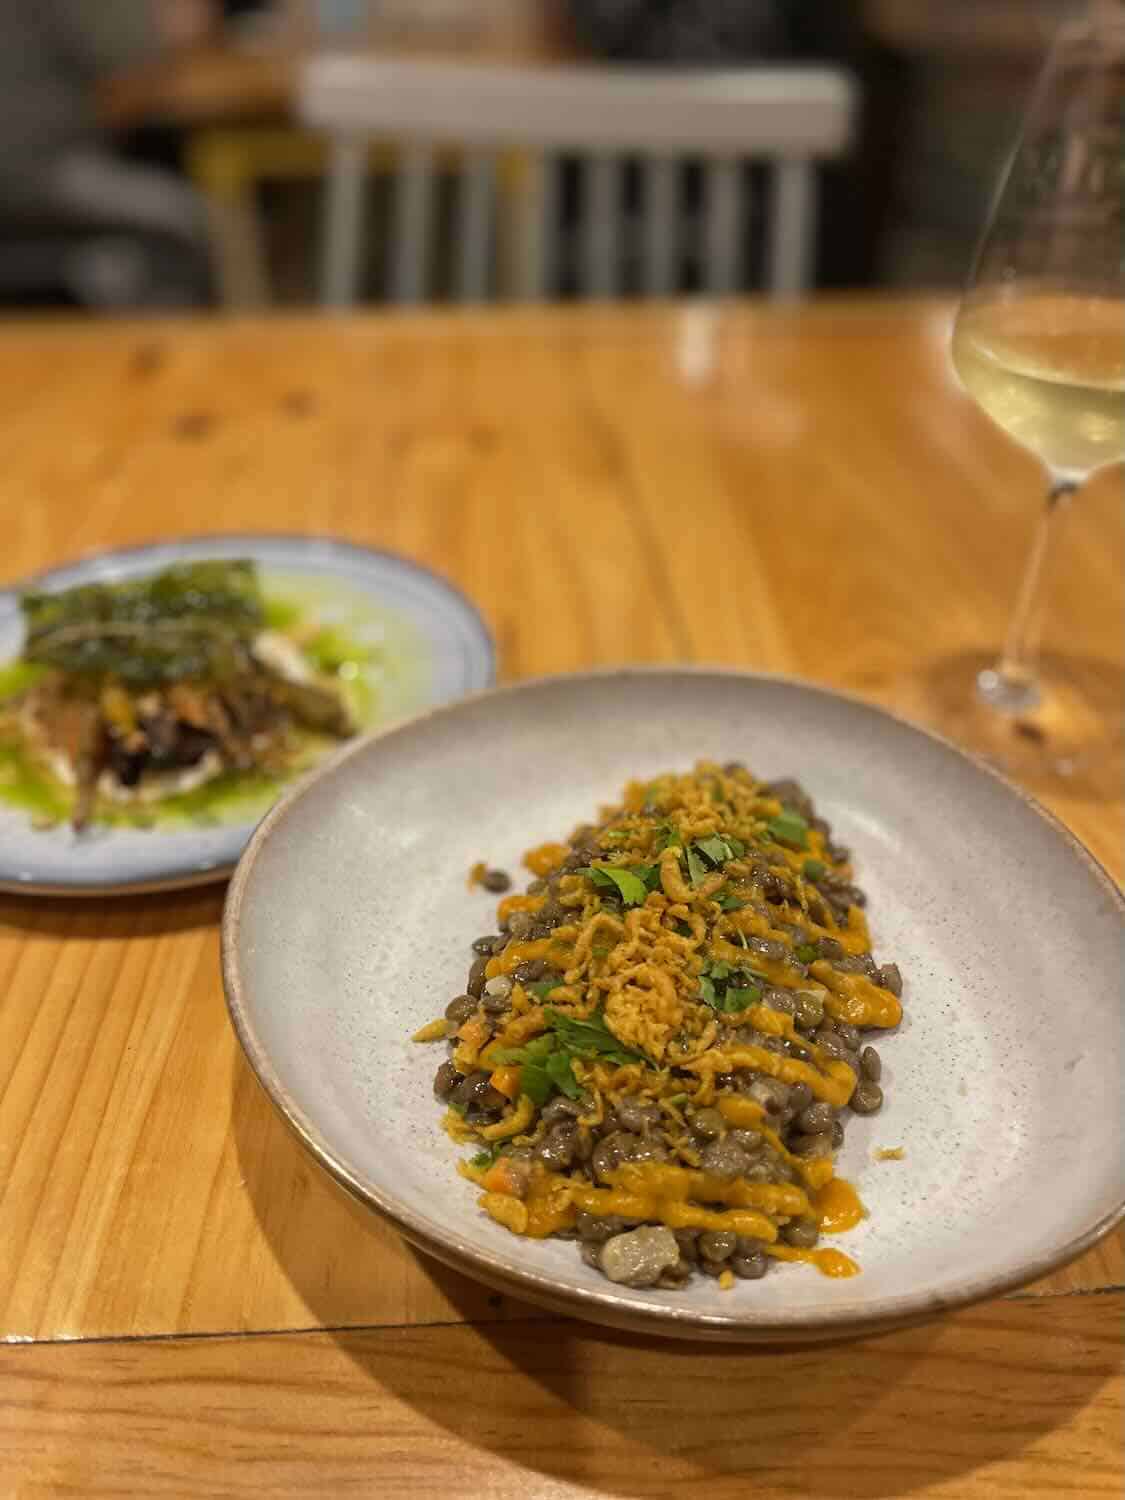 A gourmet plate in the foreground with lentils and vibrant orange sauce topped with crispy onions, accompanied by a glass of white wine and an out-of-focus dish in the background, presenting a cozy dining atmosphere.